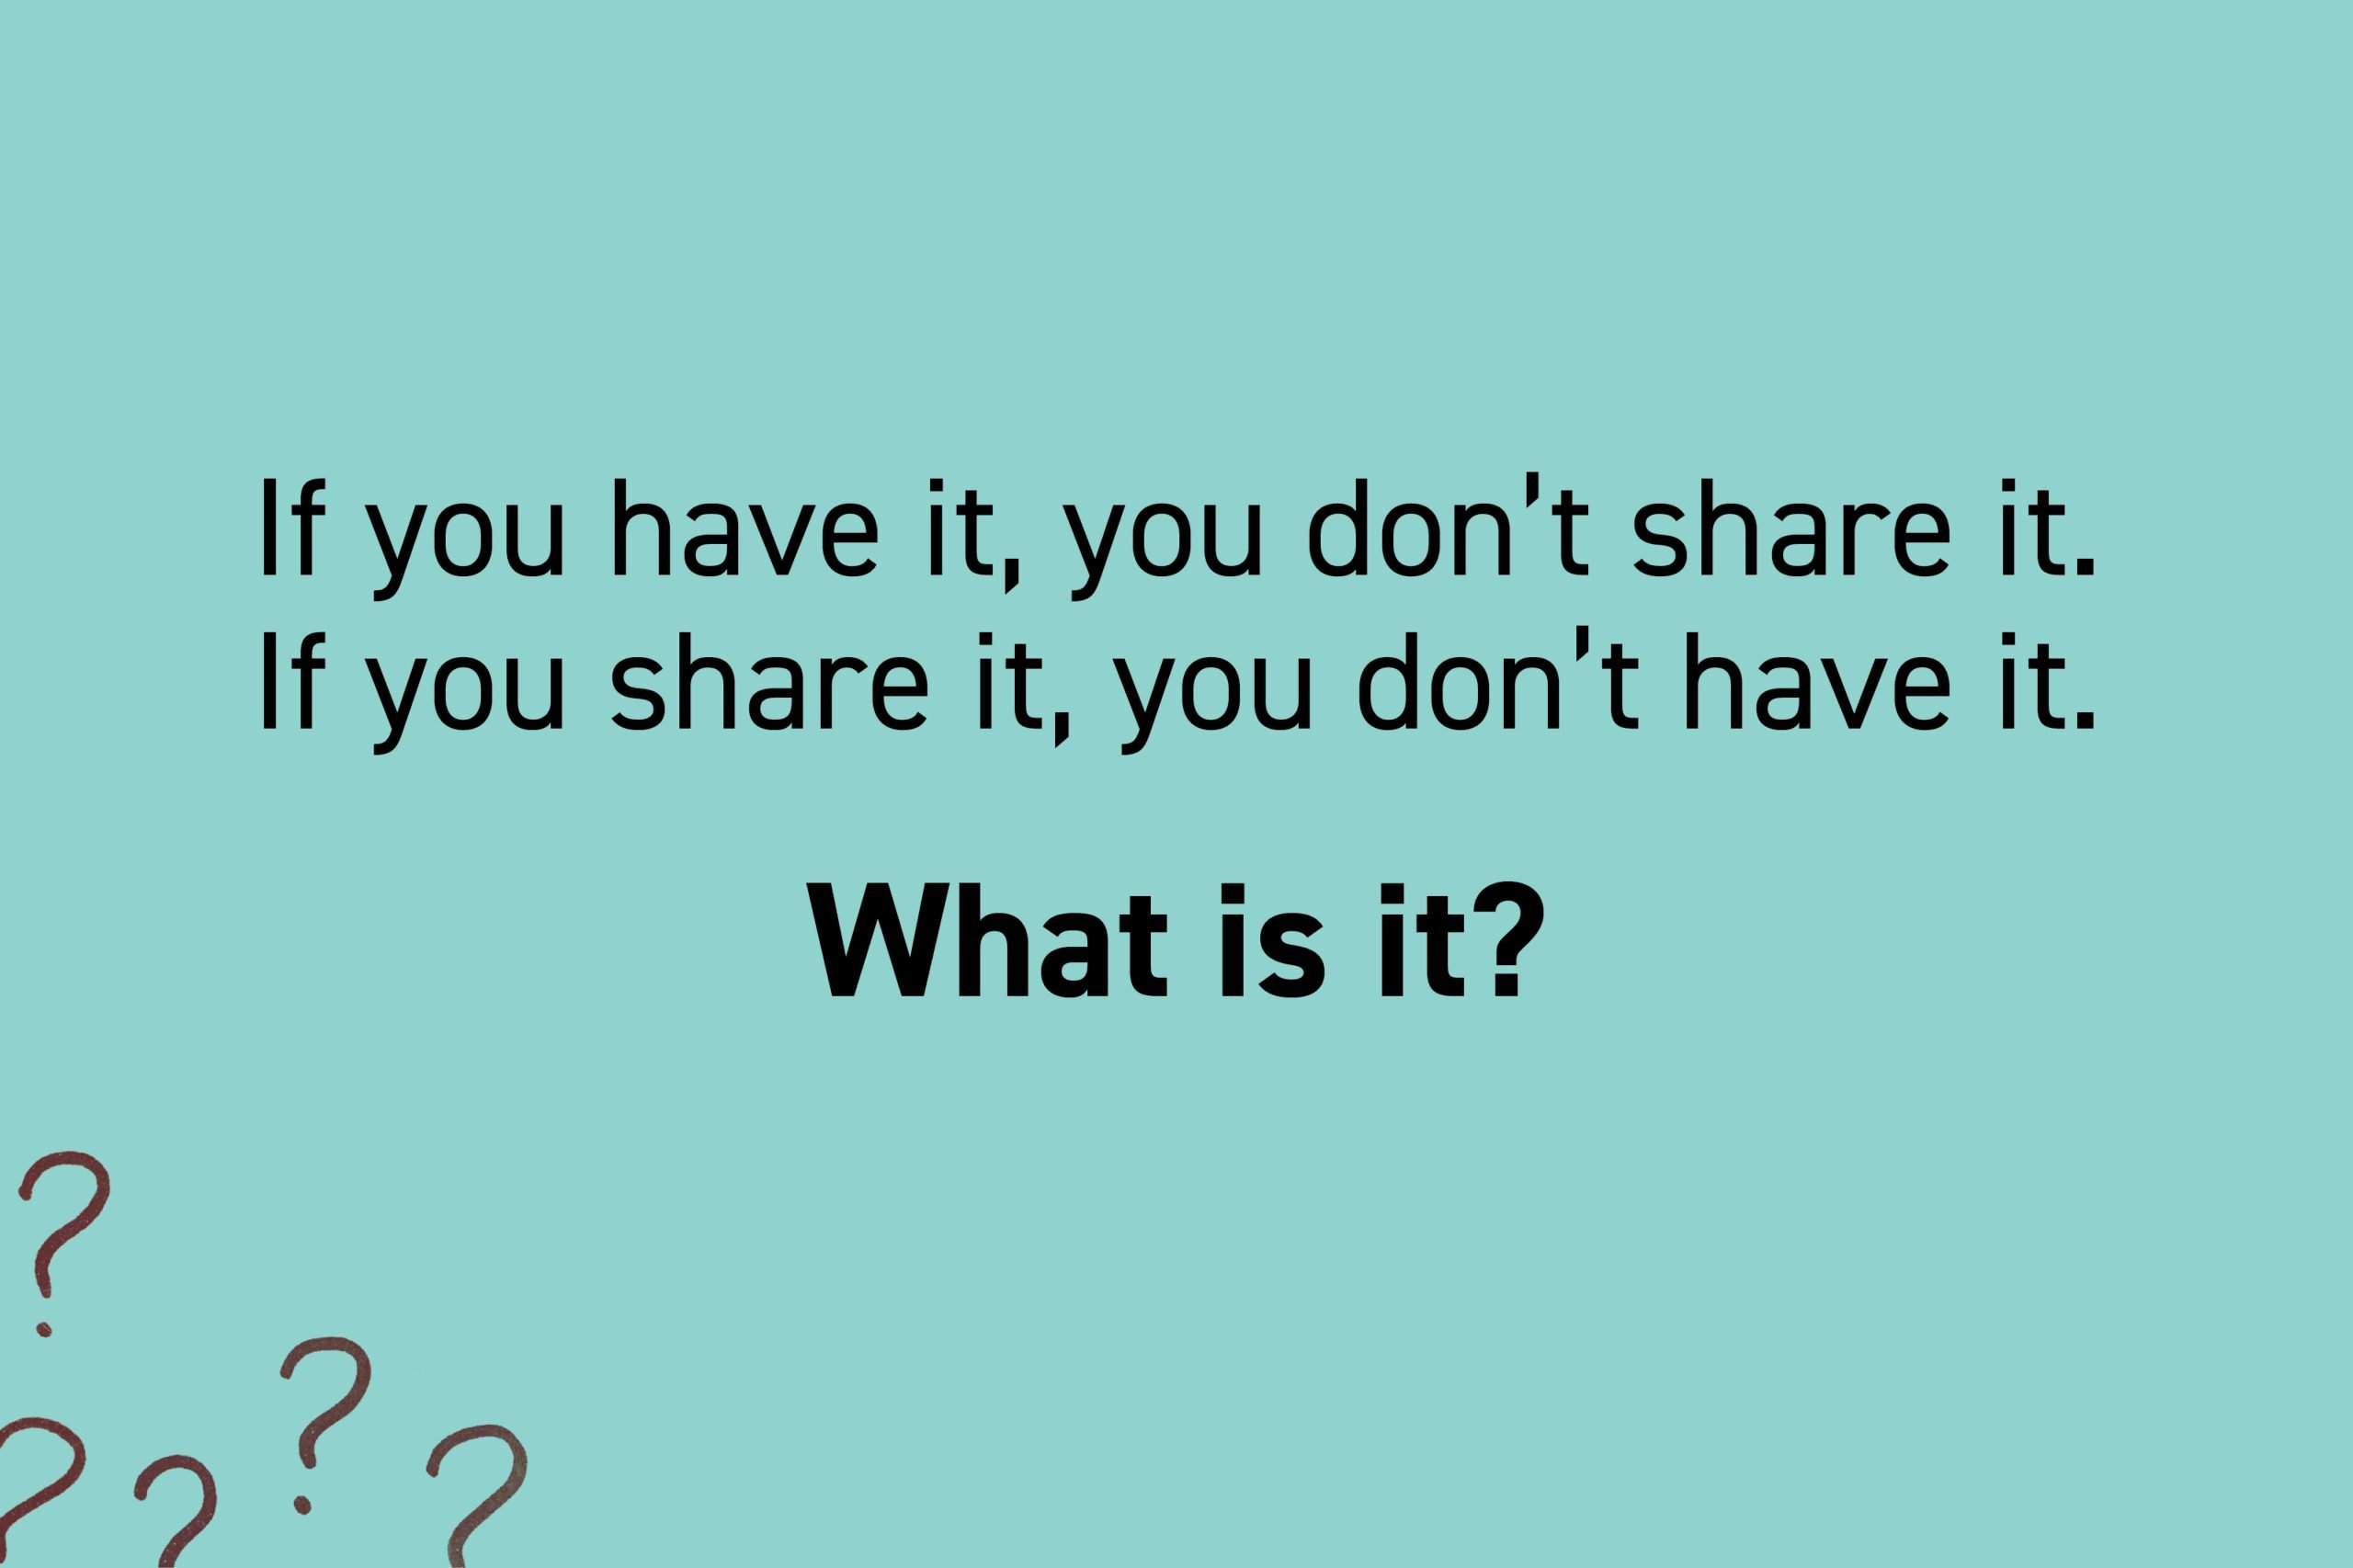 If you have it, you don't share it. If you share it, you don't have it. What is it?